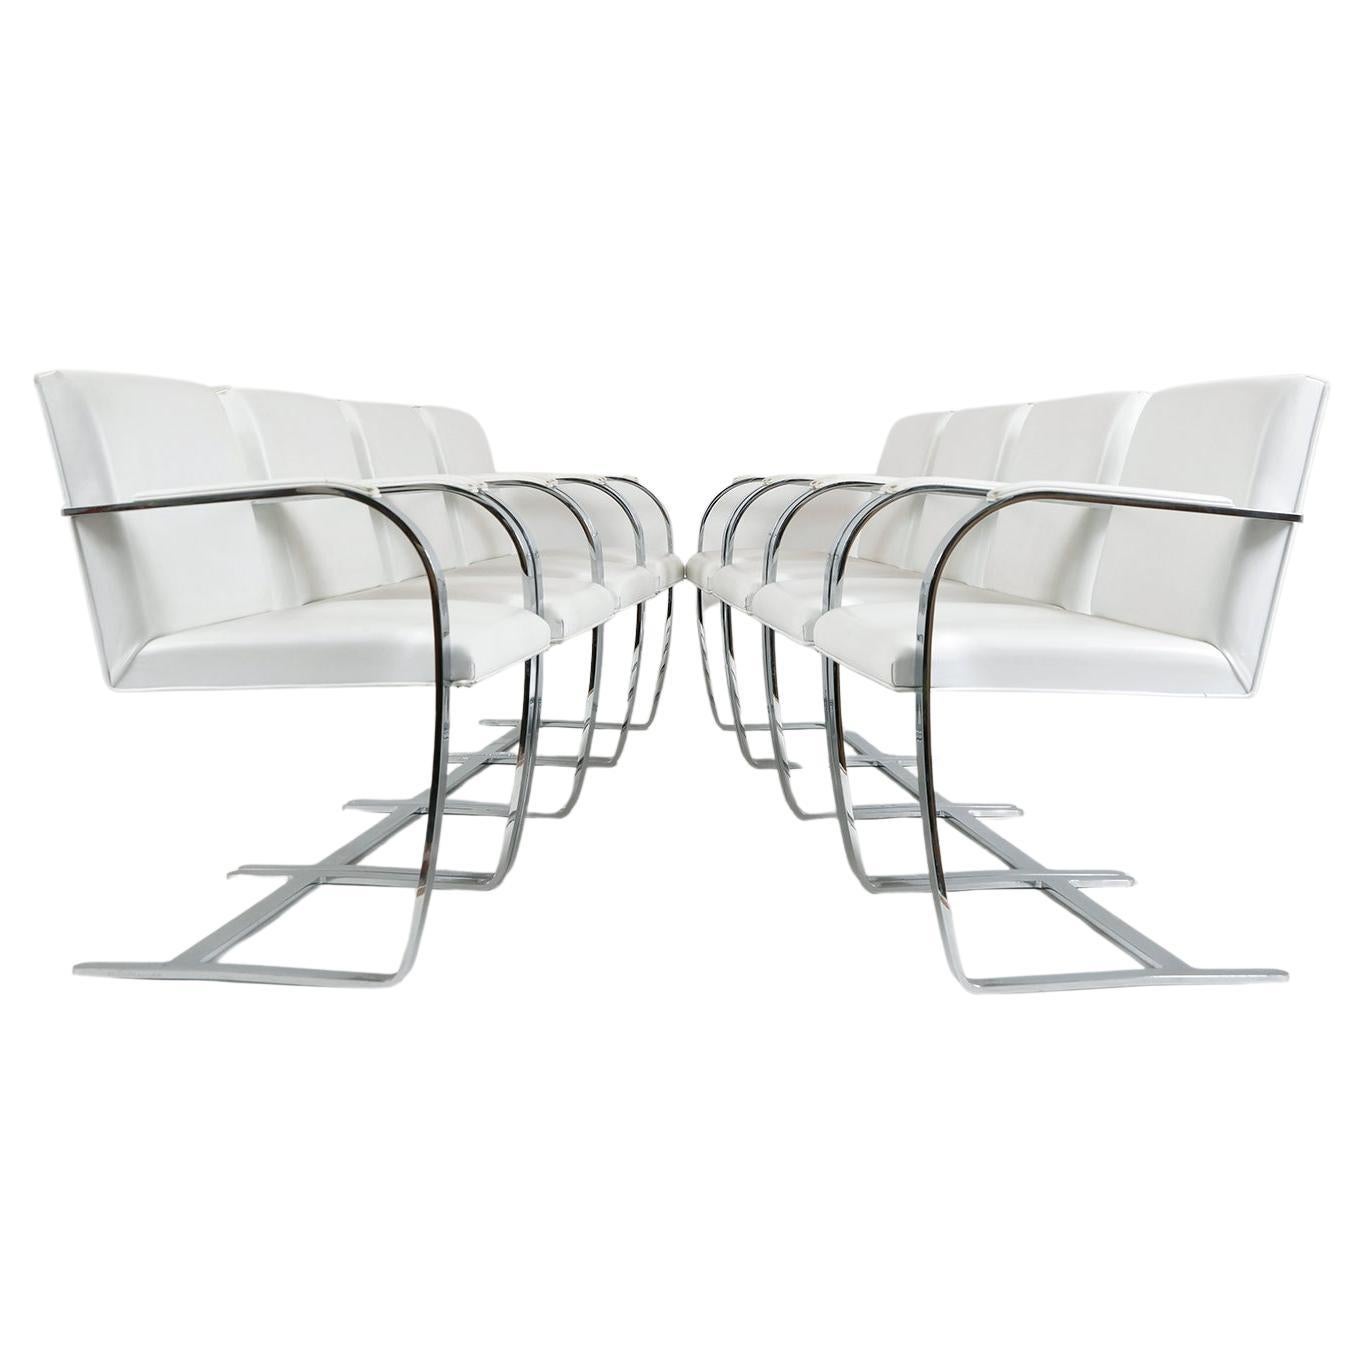 Set 8 Mies van der Rohe Knoll Brno Flat Bar 255 Cantilever Dining Chairs White